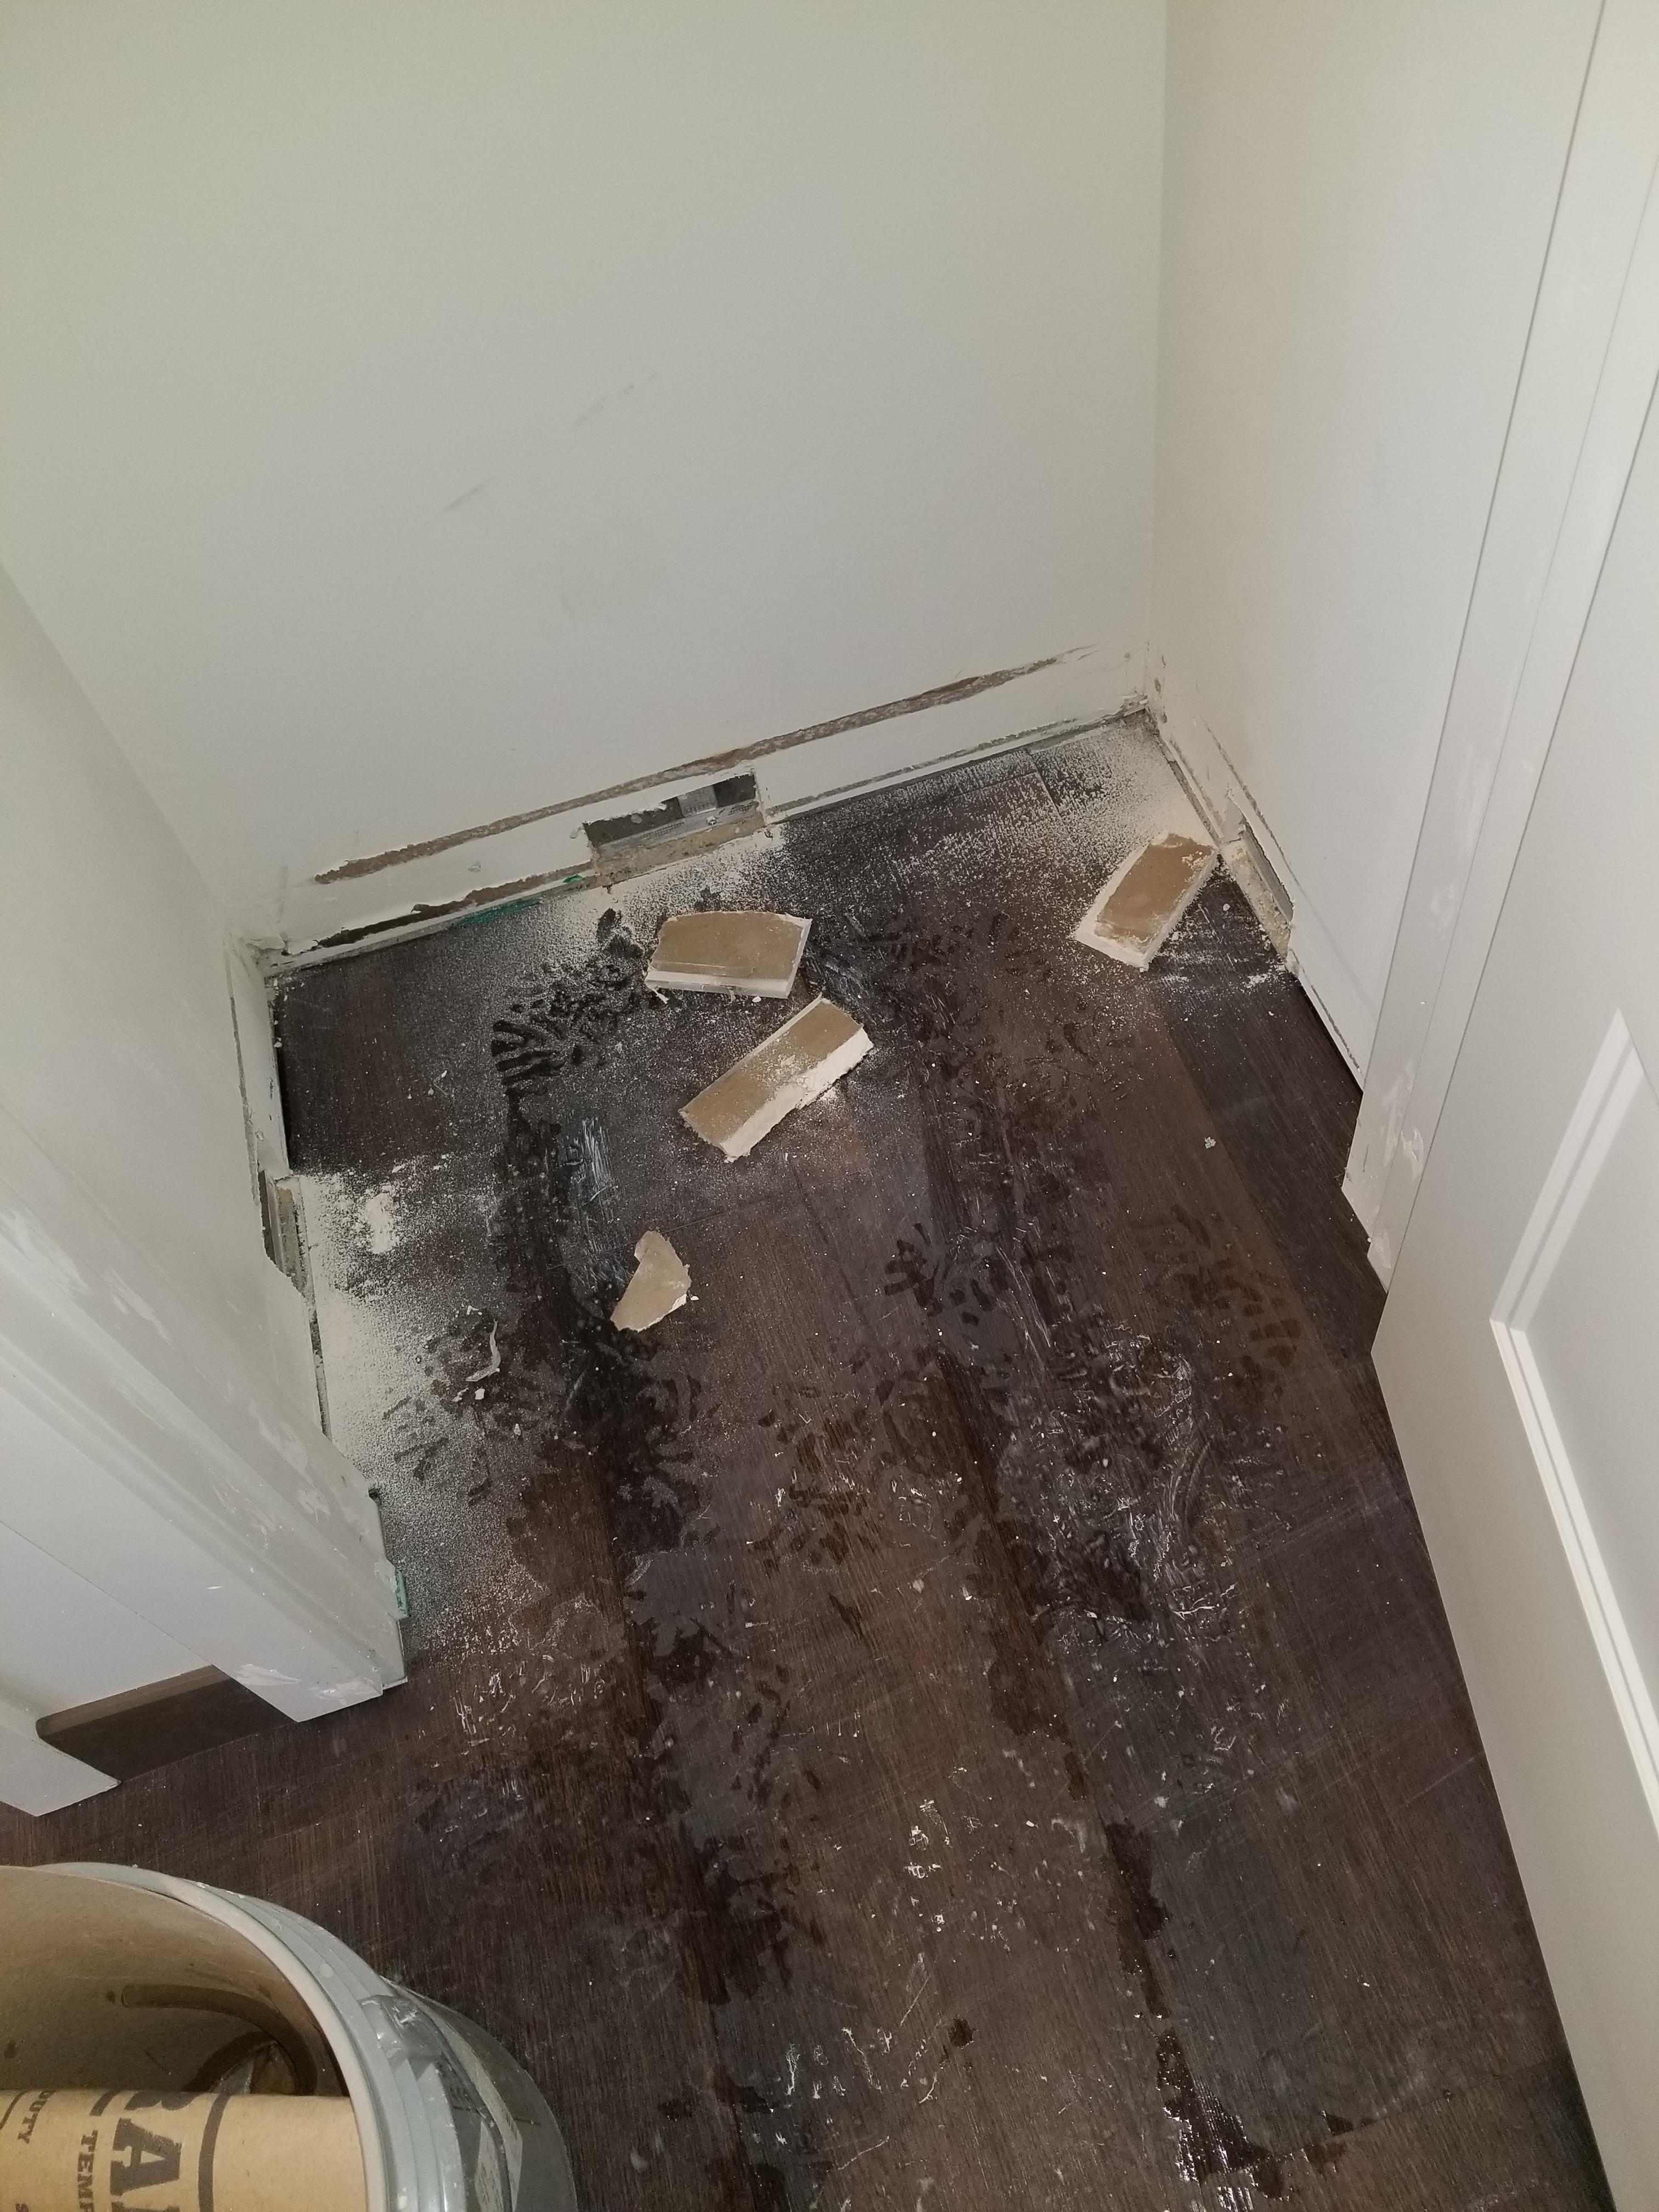 When you have water damage in your home, SERVPRO of Brickell will respond to your call!